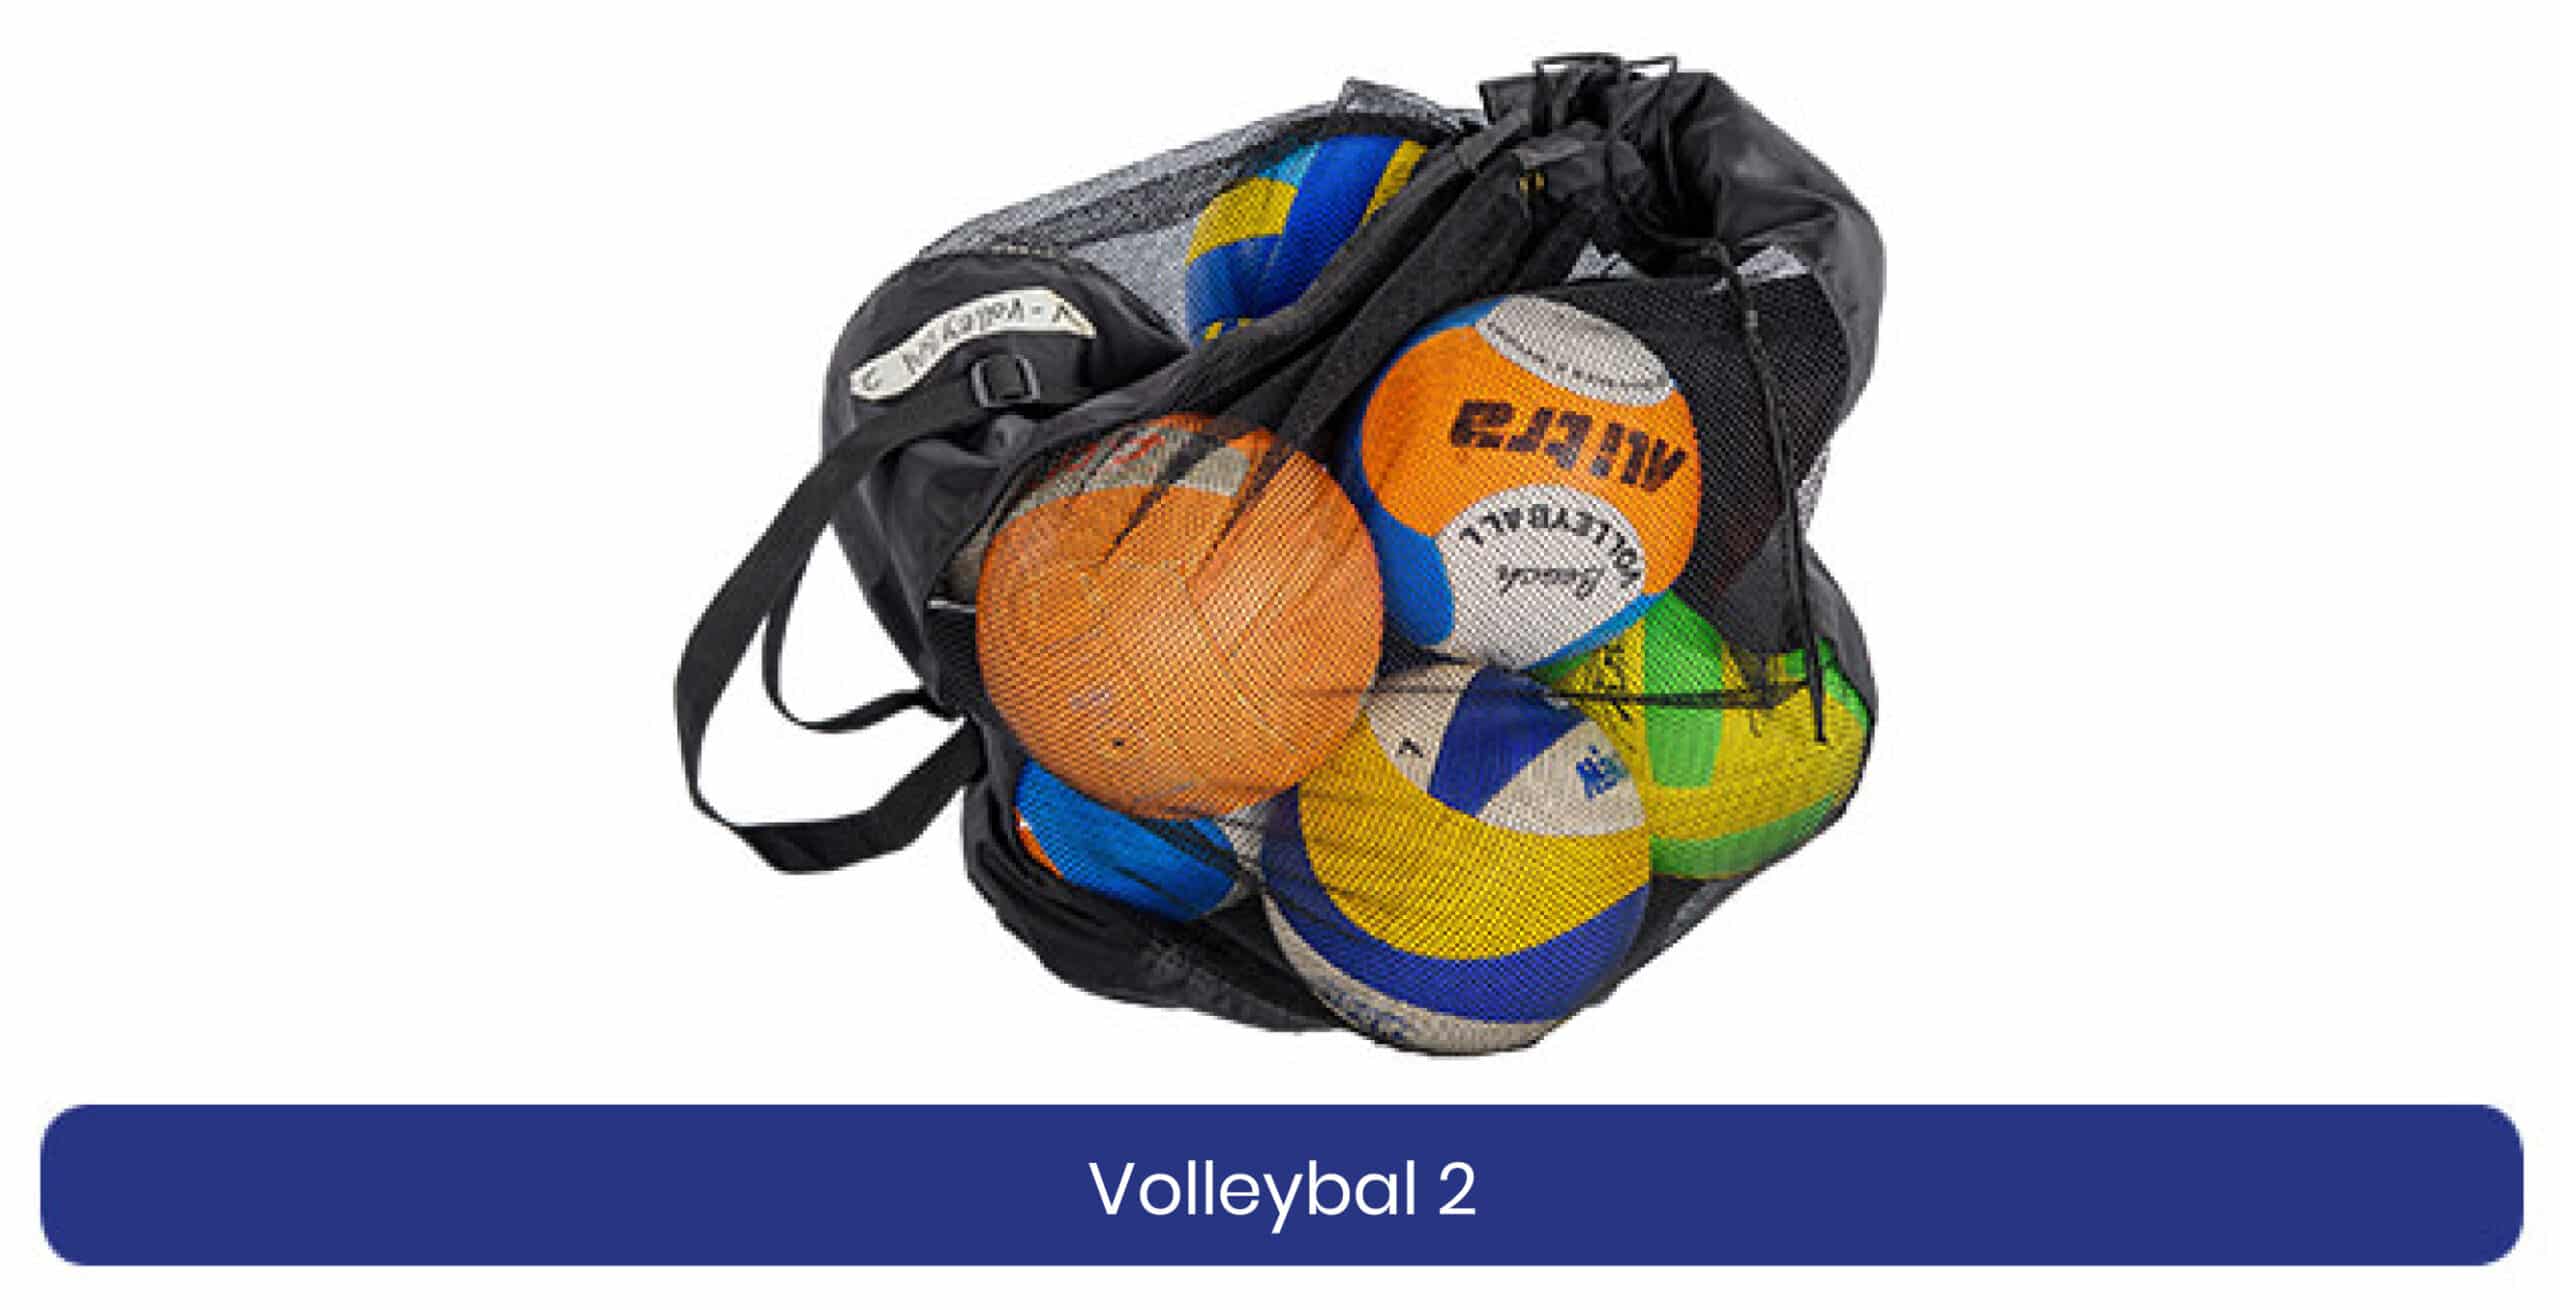 Volleybal 2 lenen product